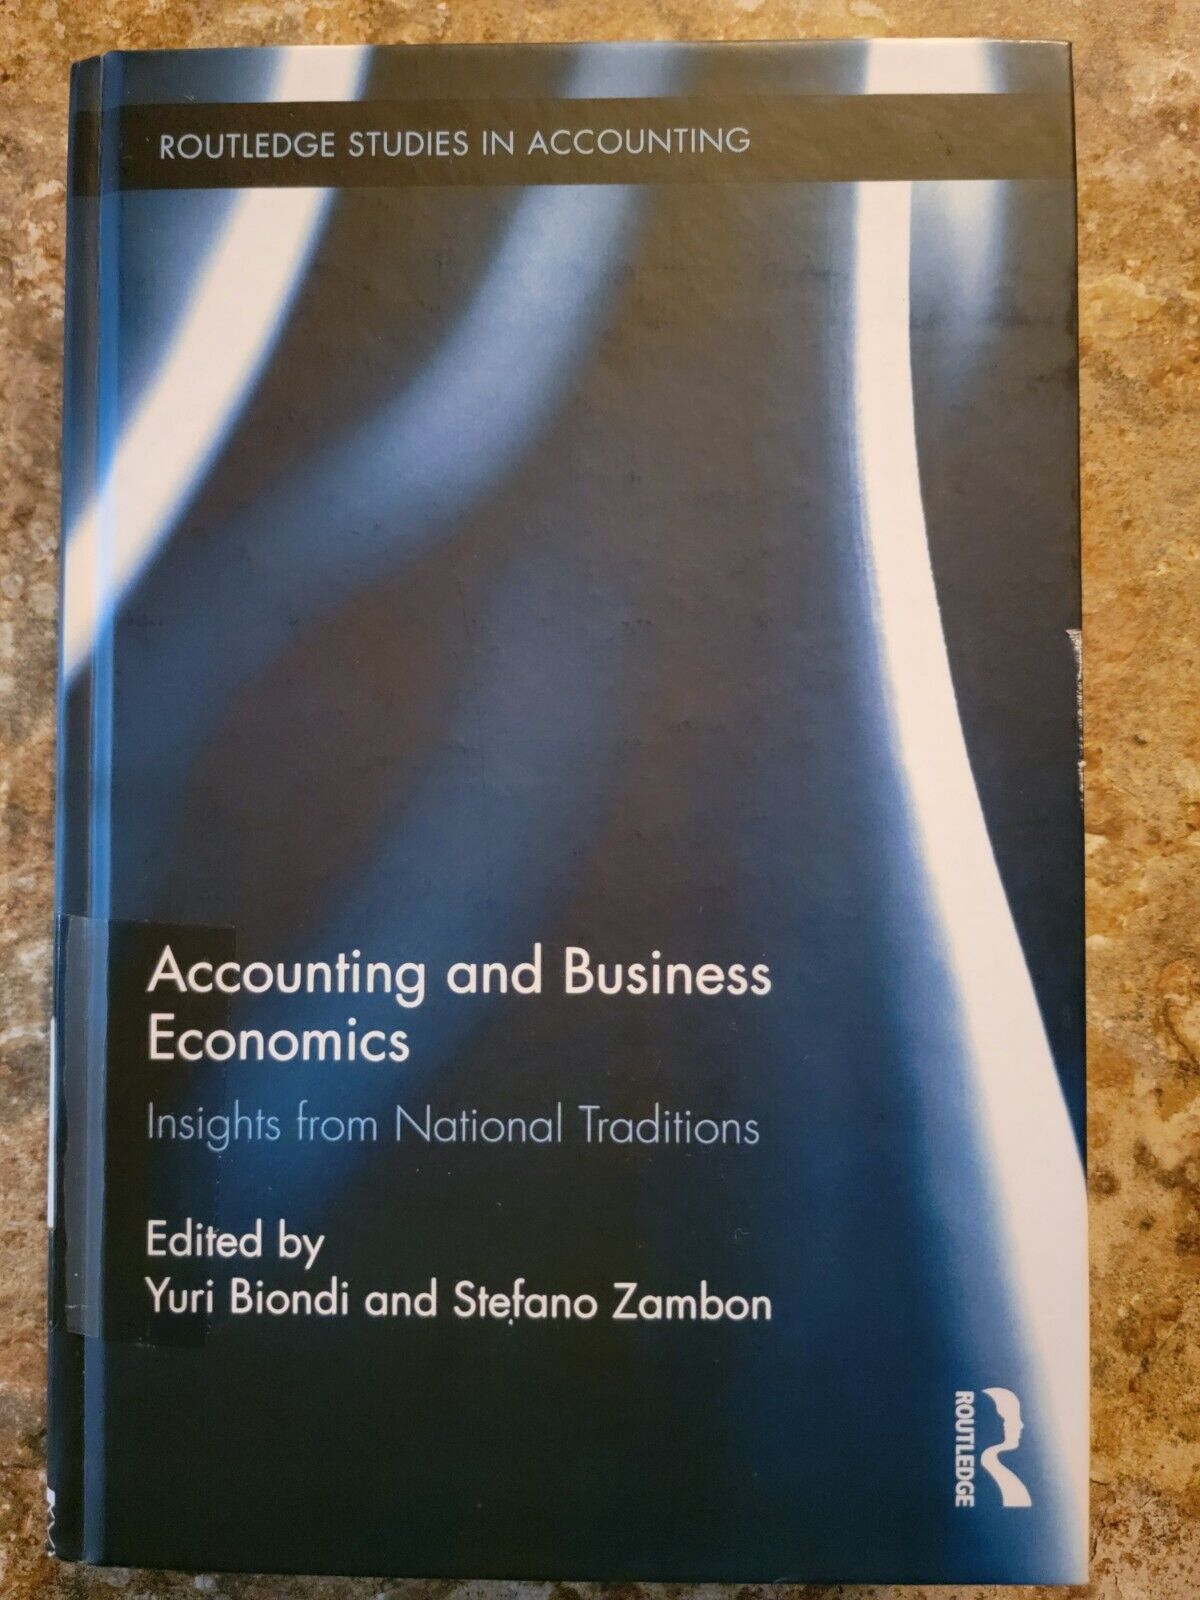  Accounting and Business Economics: Insights from National Traditions